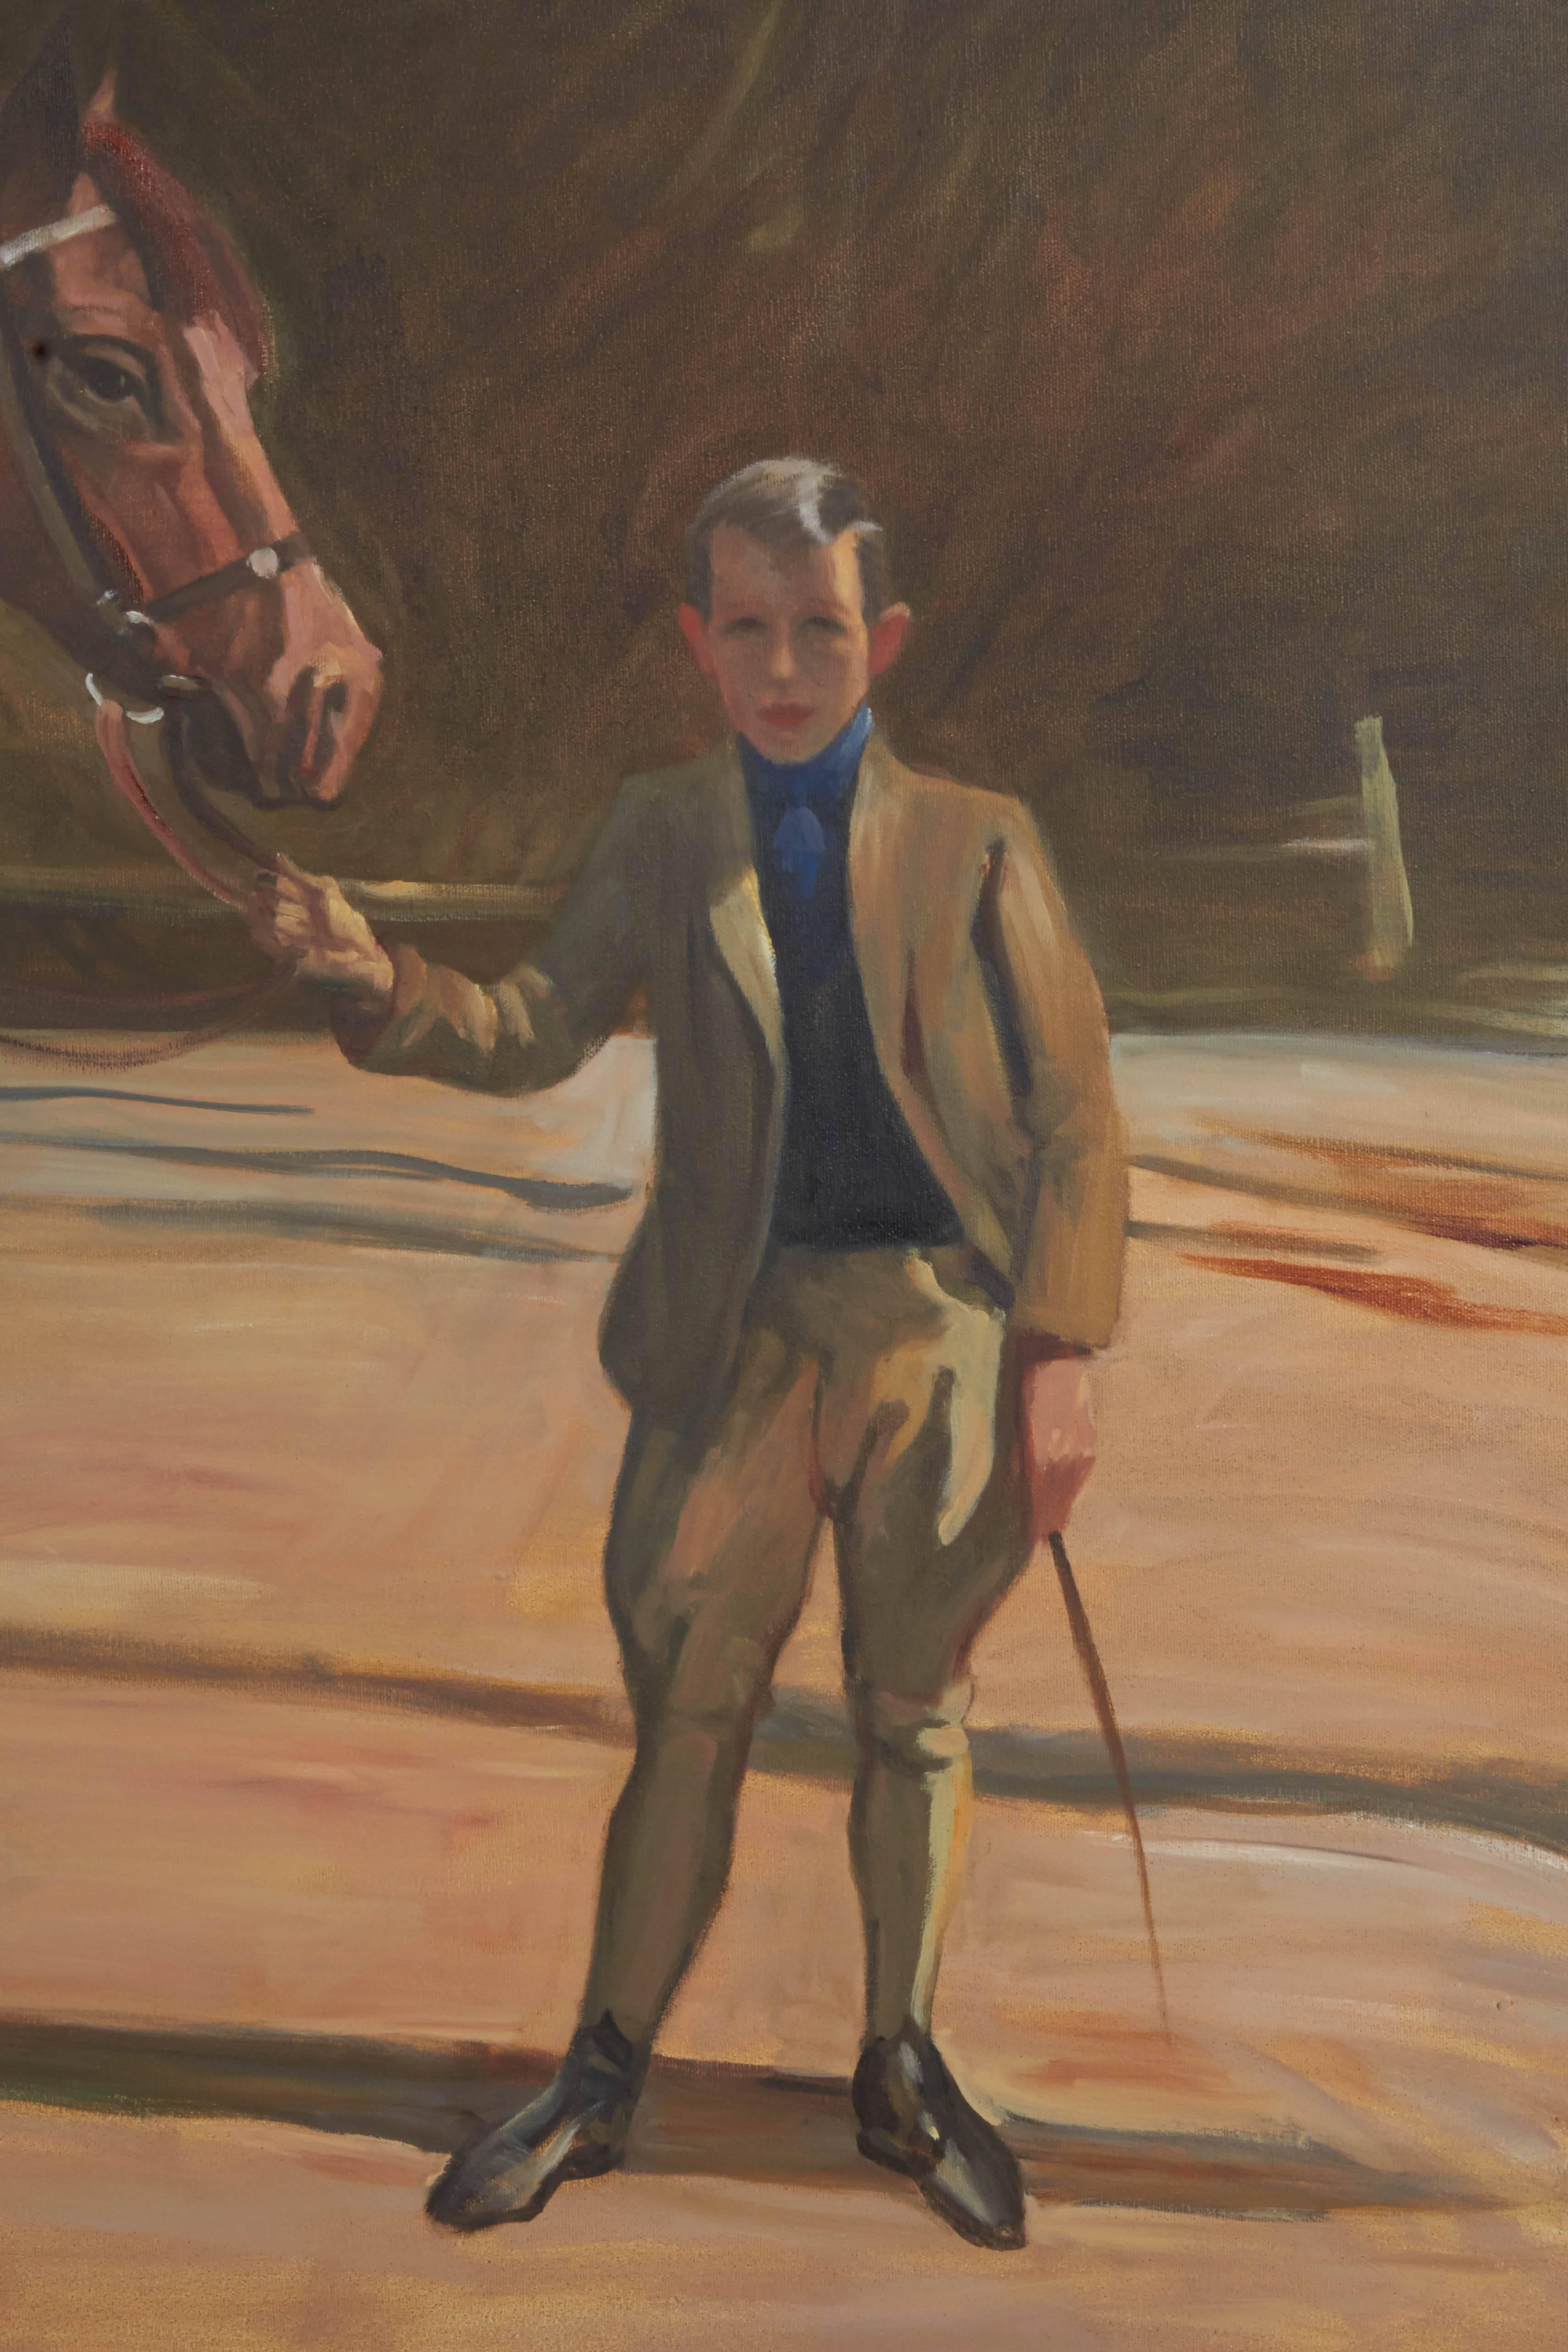 Untitled work; oil on canvas of a boy with a horse. Framed in gold color frame.

Not available for sale or to ship in the state of California.